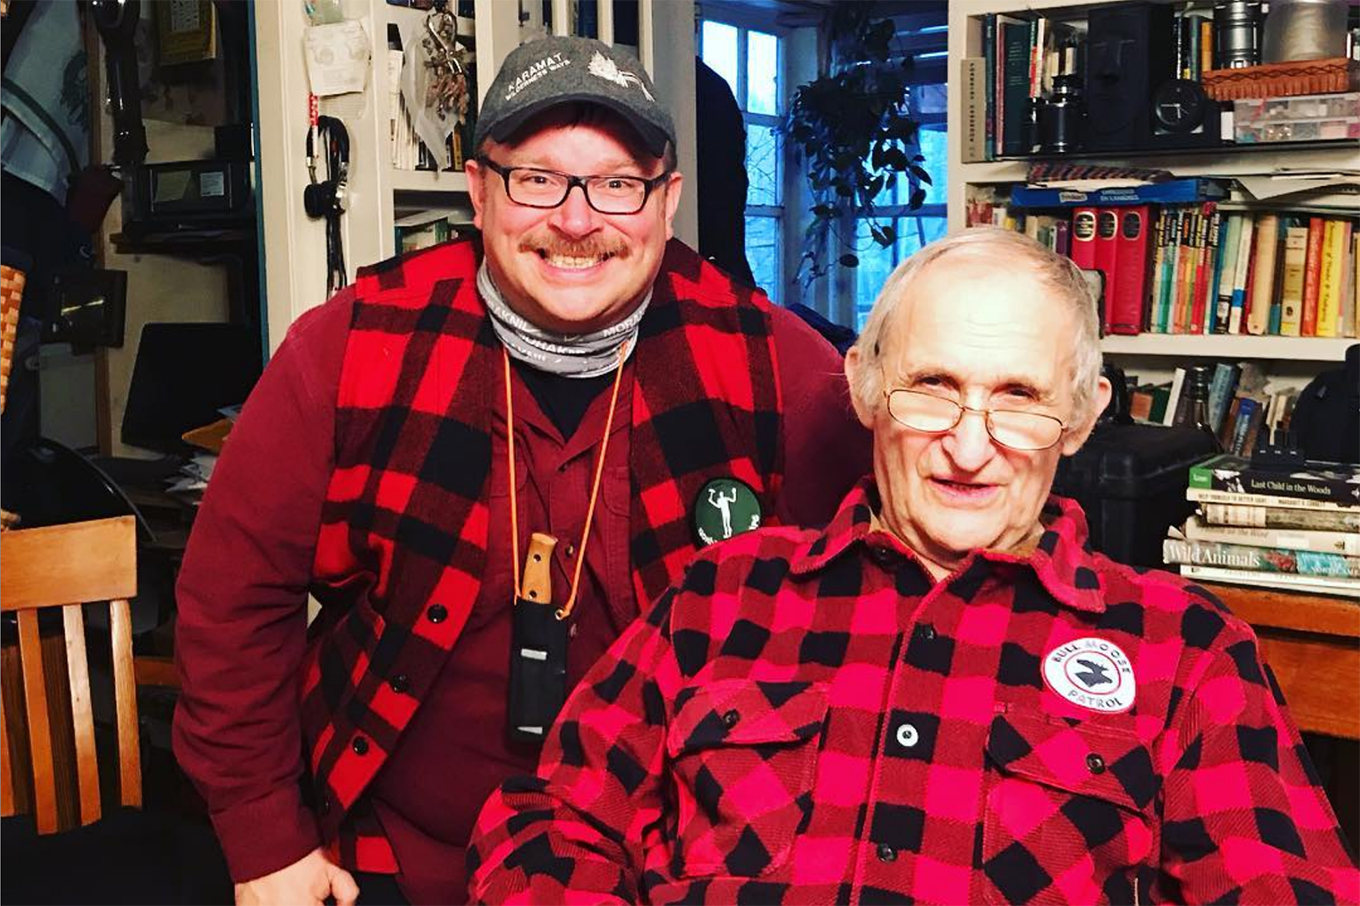 Two Canadian outdoorsmen in red check shirts